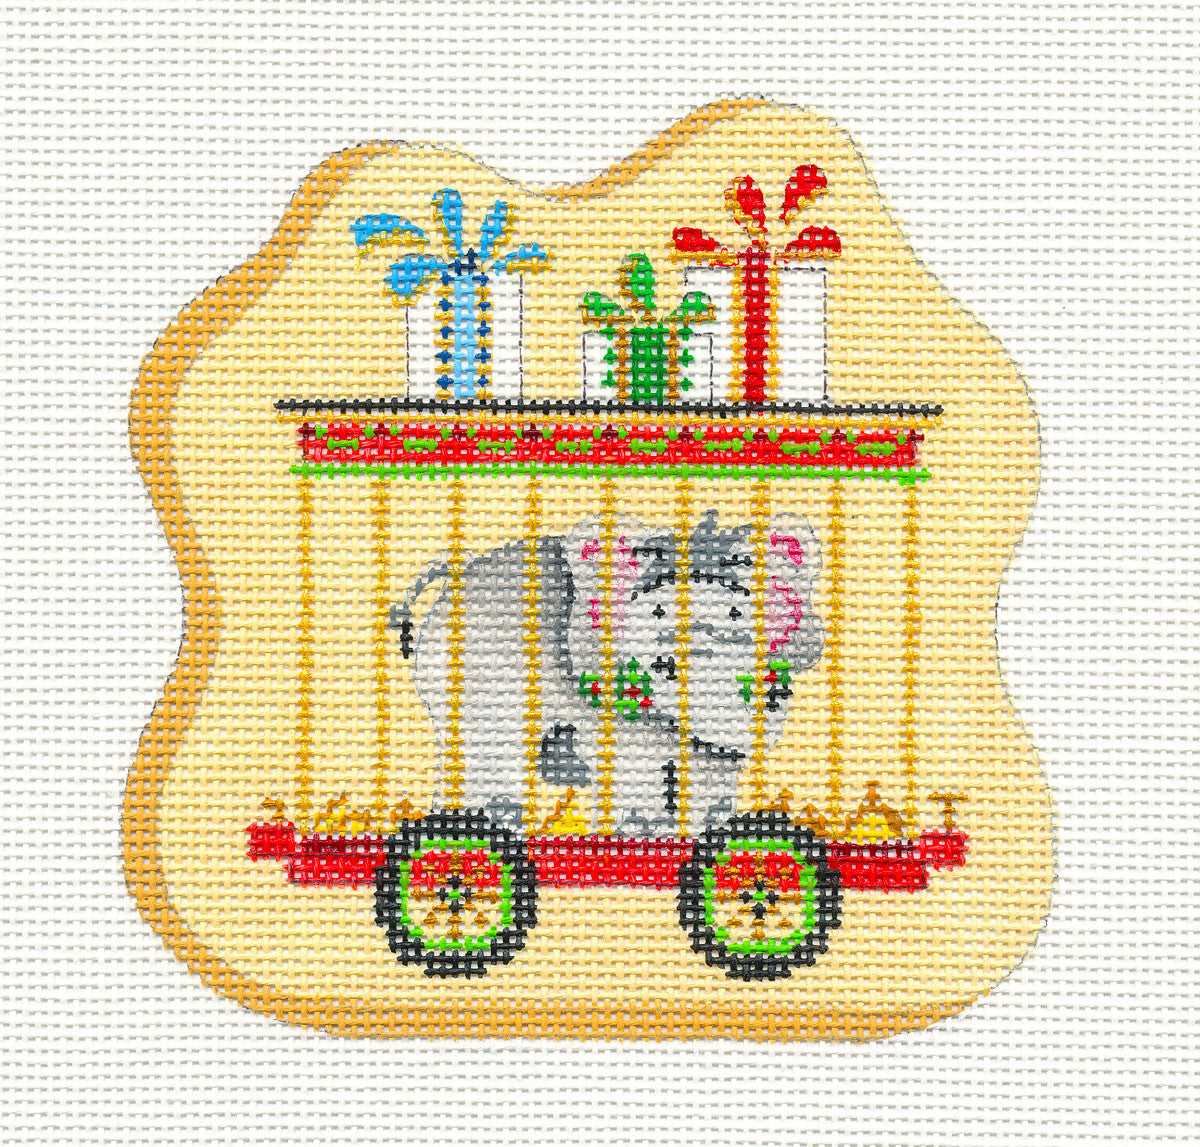 Train~Car With Elephant on hand painted Needlepoint Canvas~ by Strictly Christmas